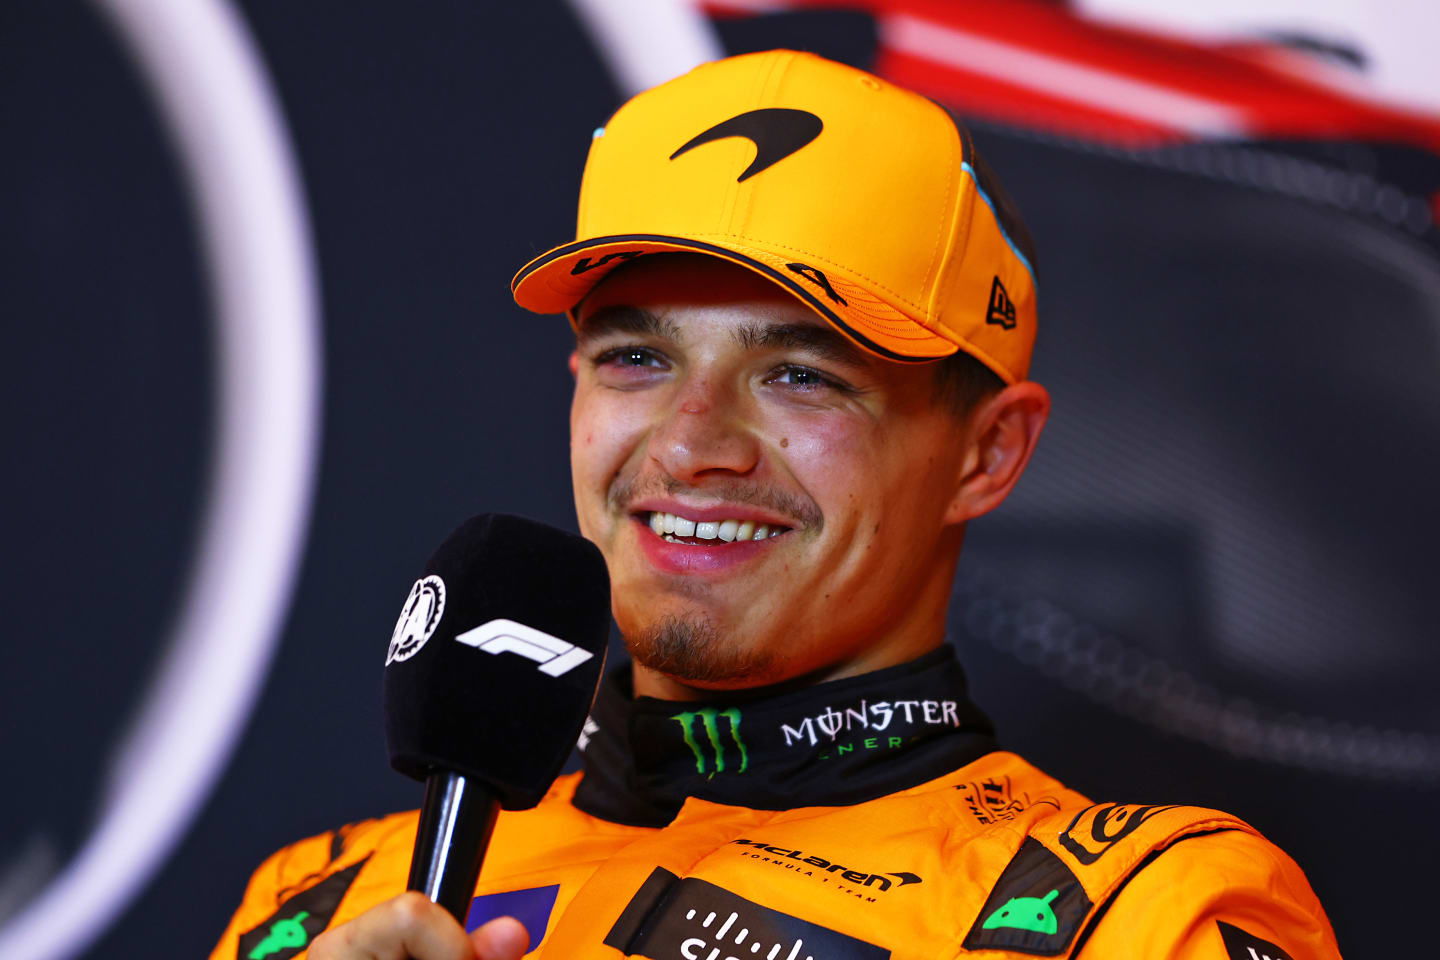 MONTREAL, QUEBEC - JUNE 08: Third placed qualifier Lando Norris of Great Britain and McLaren attends the press conference after qualifying ahead of the F1 Grand Prix of Canada at Circuit Gilles Villeneuve on June 08, 2024 in Montreal, Quebec. (Photo by Clive Rose/Getty Images)